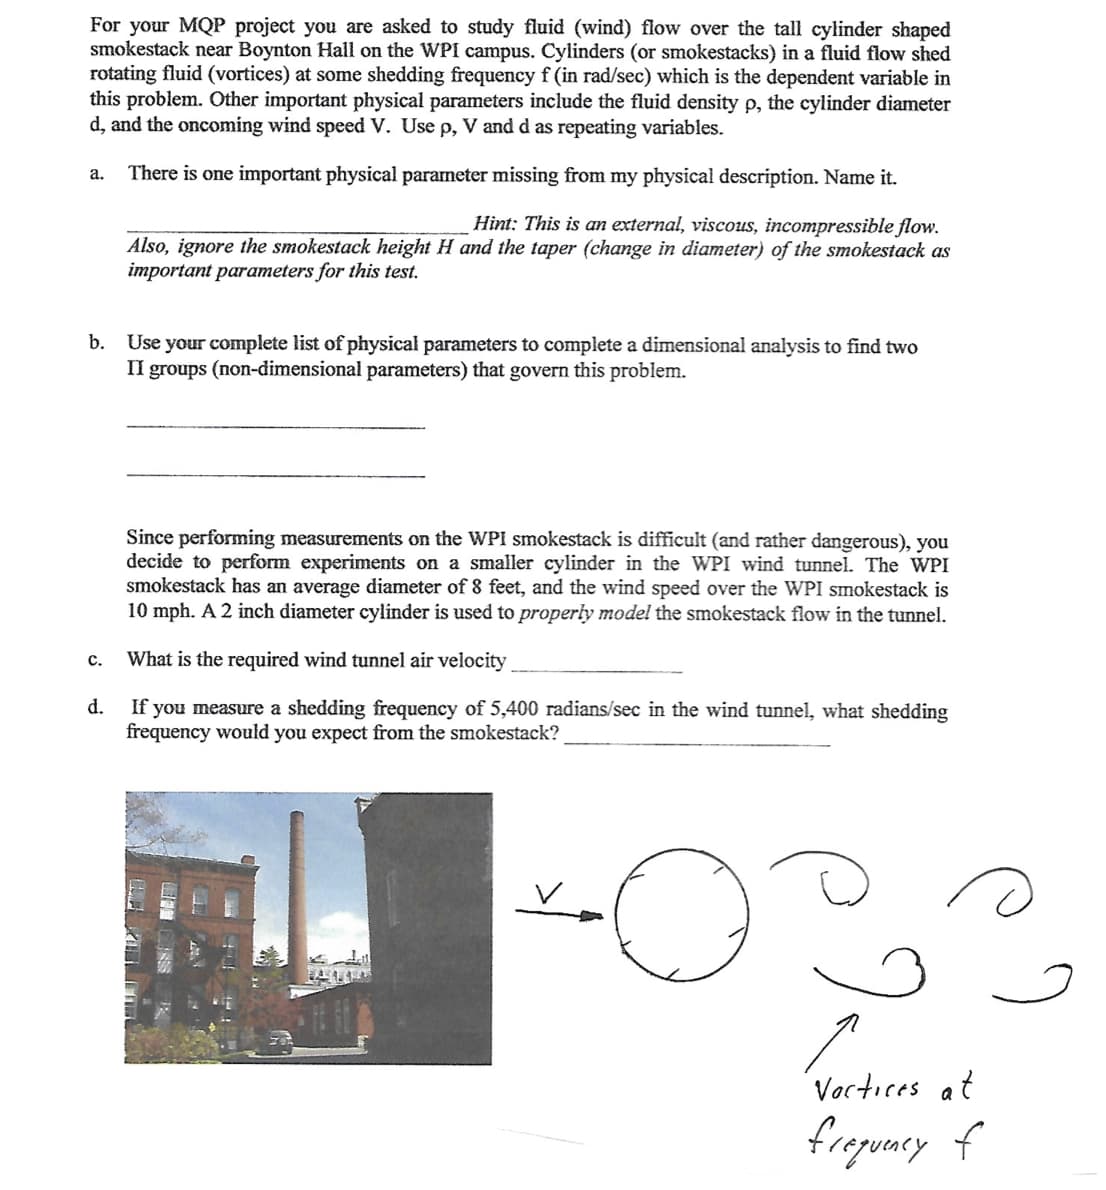 For your MQP project you are asked to study fluid (wind) flow over the tall cylinder shaped
smokestack near Boynton Hall on the WPI canmpus. Cylinders (or smokestacks) in a fluid flow shed
rotating fluid (vortices) at some shedding frequency f (in rad/sec) which is the dependent variable in
this problem. Other important physical parameters include the fluid density p, the cylinder diameter
d, and the oncoming wind speed V. Use p, V and d as repeating variables.
There is one important physical parameter missing from my physical description. Name it.
